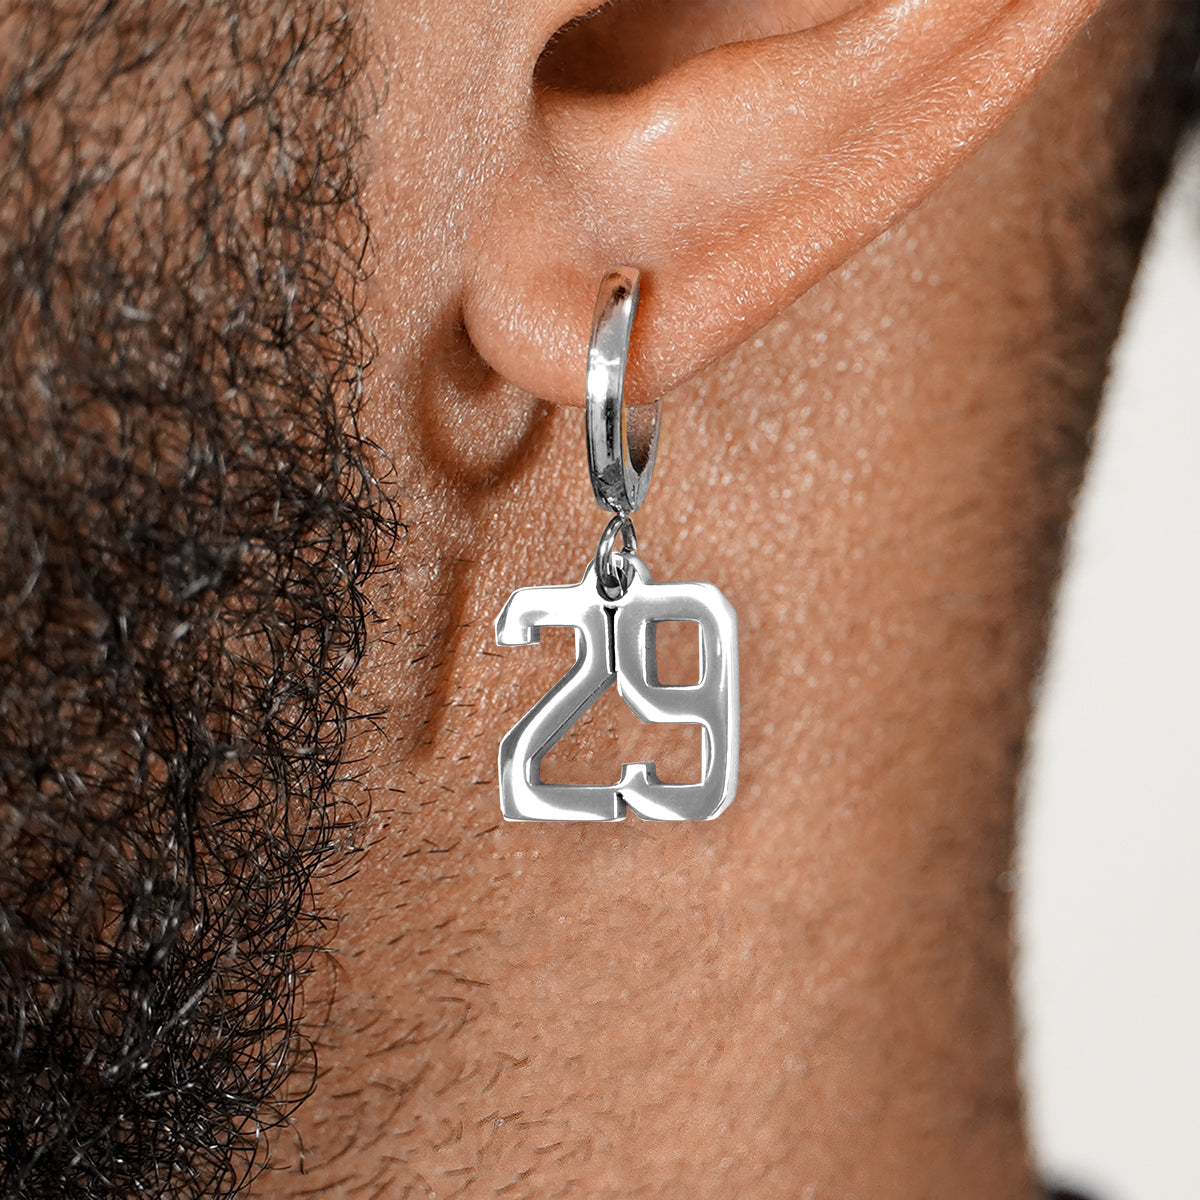 29 Number Earring - Stainless Steel